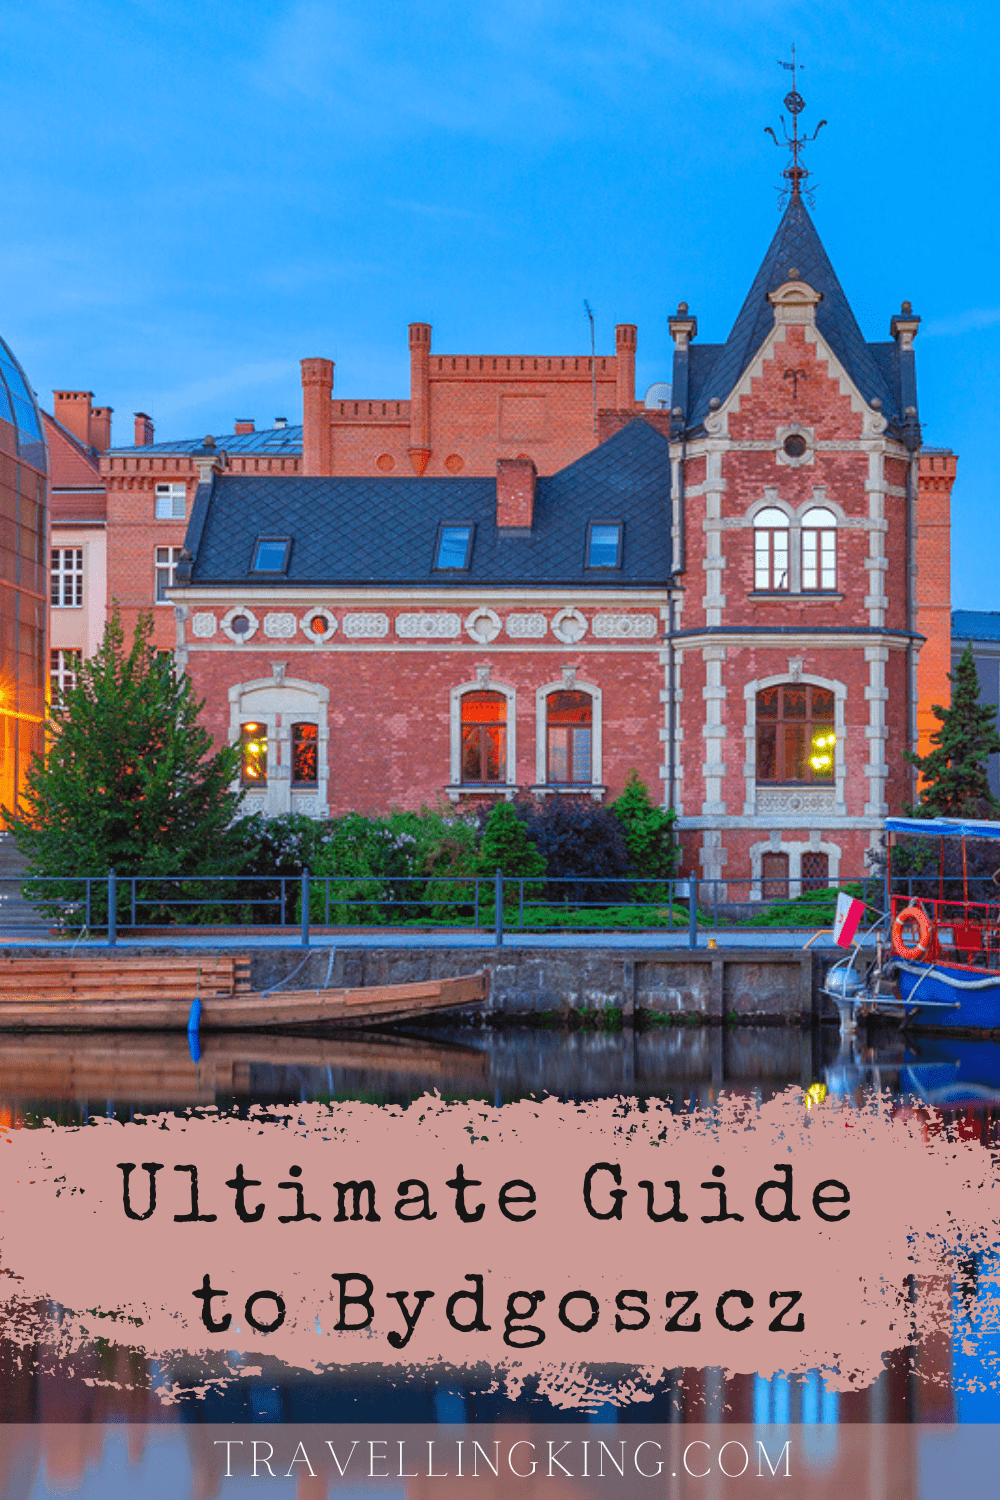 The Ultimate Guide to Bydgoszcz